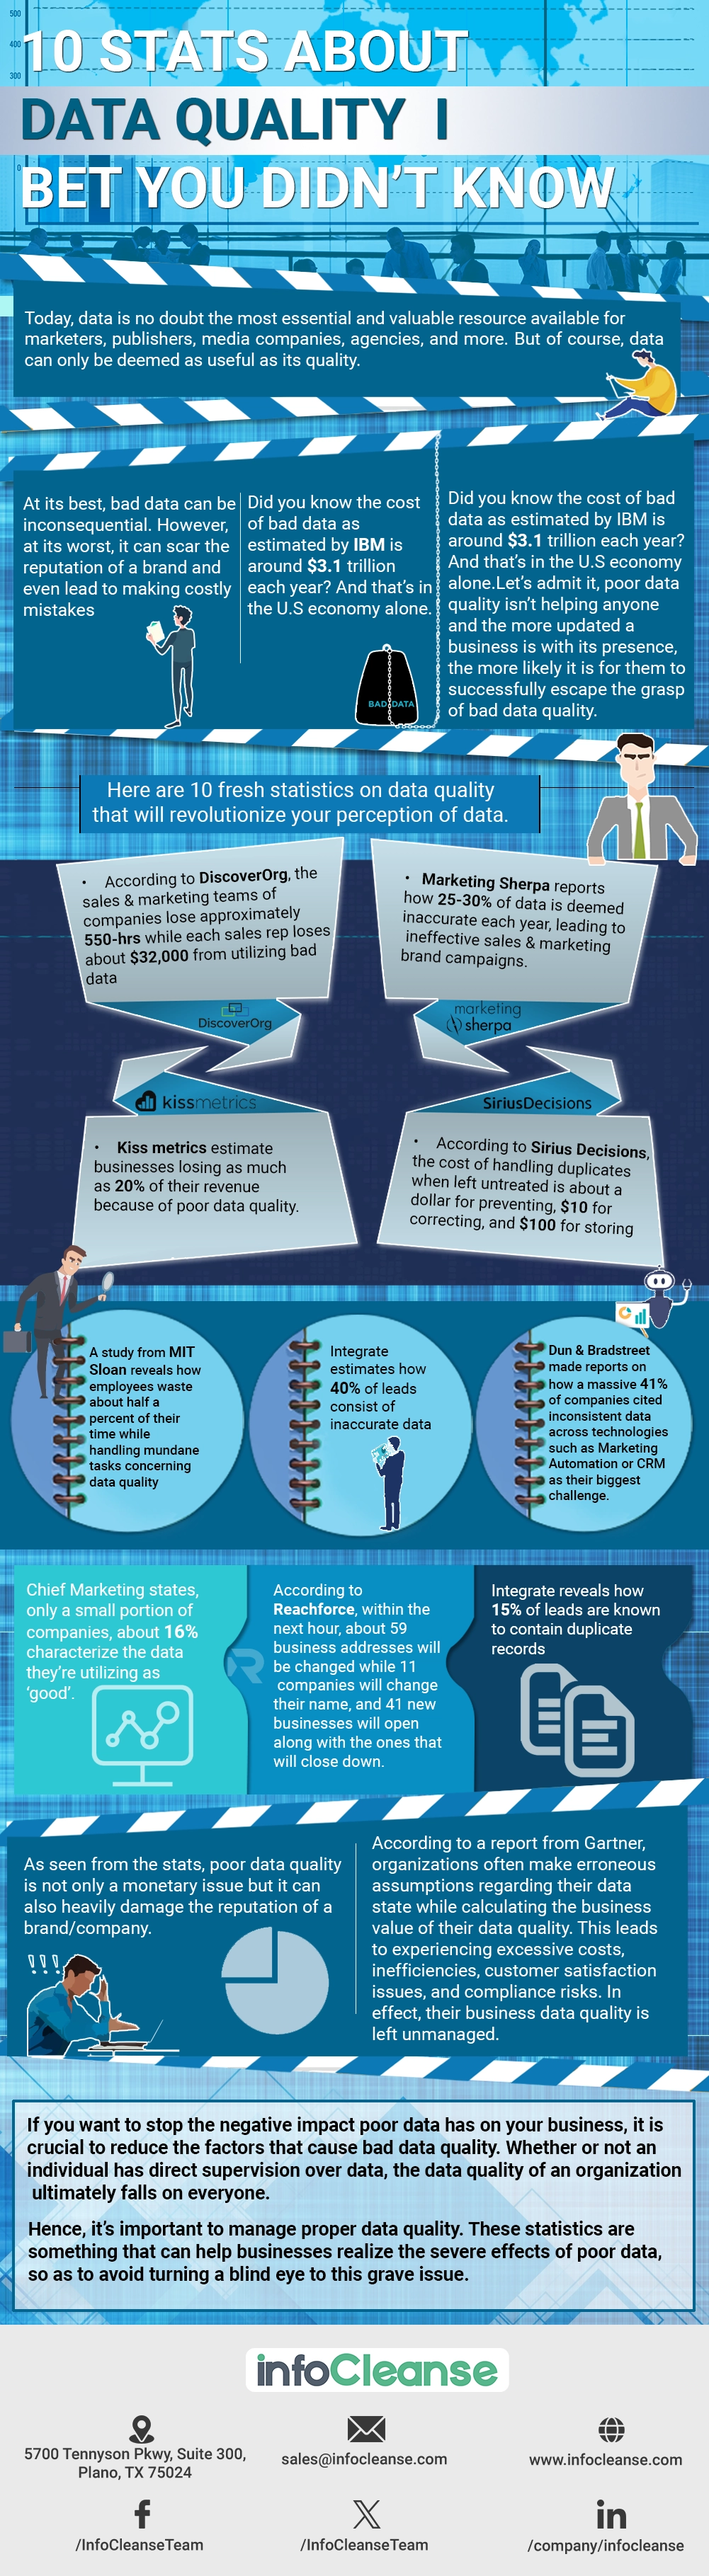 10 Stats About Data Quality I Bet You Didnt Know Infographic